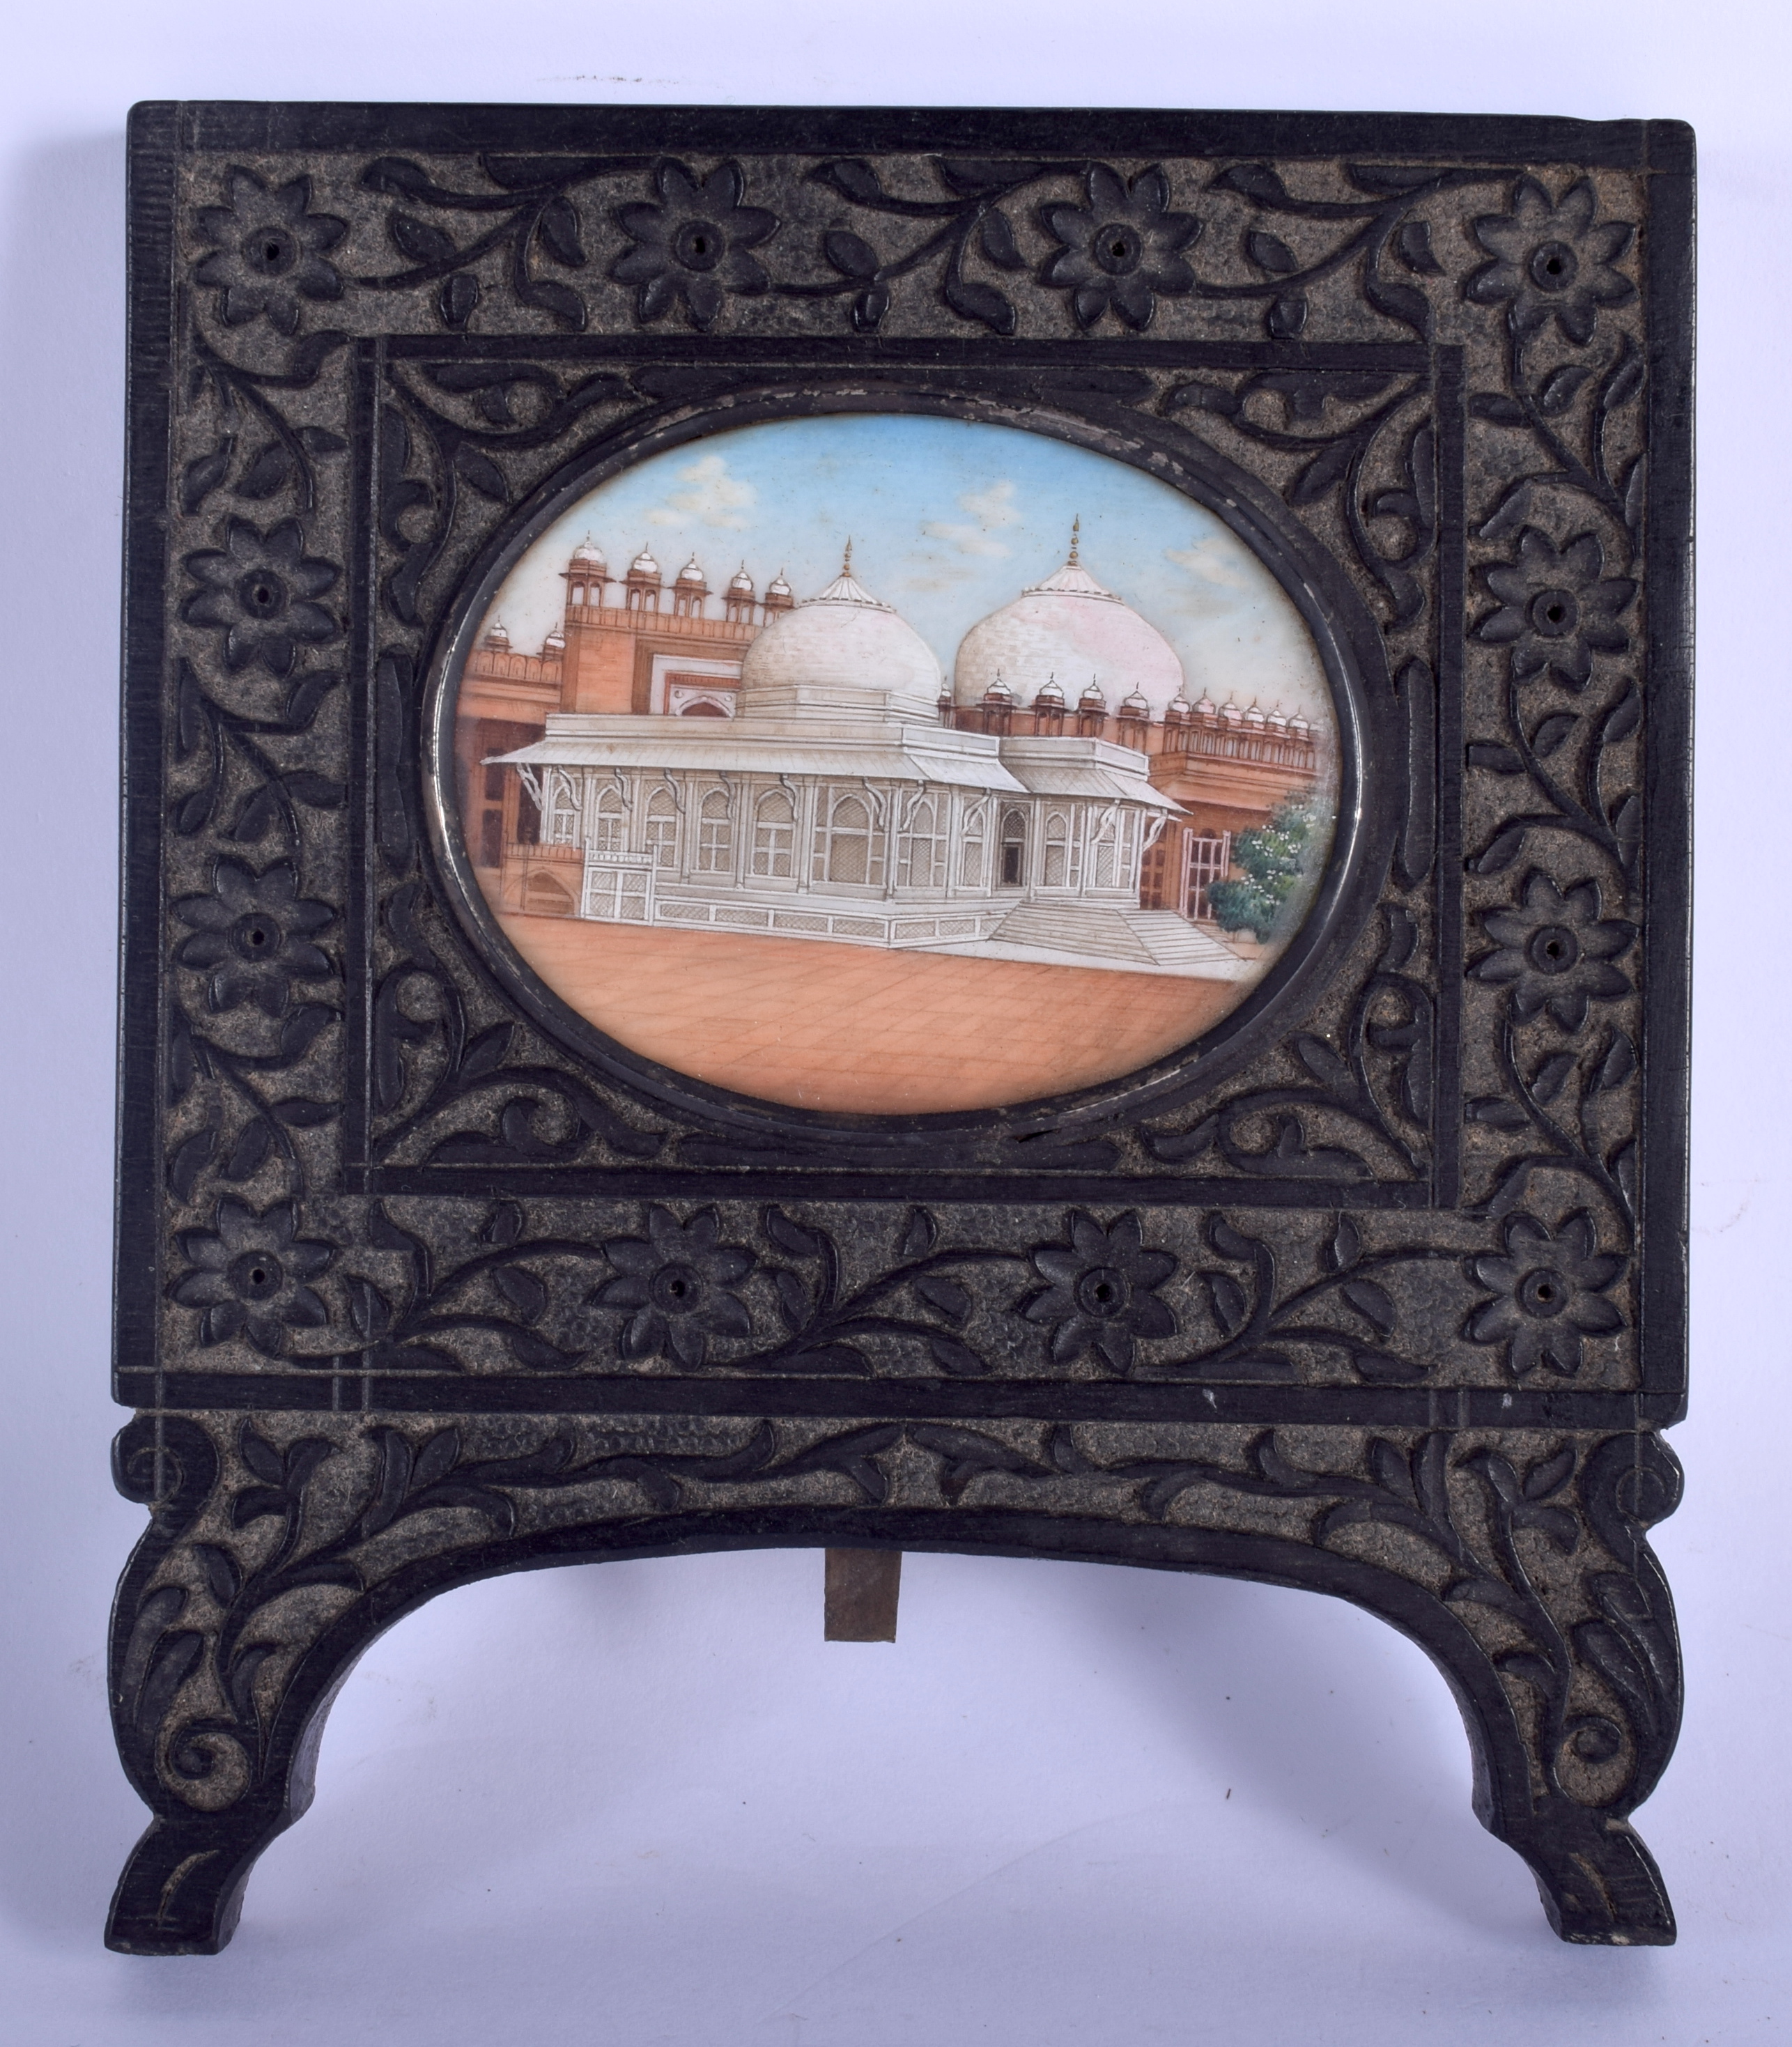 A 19TH CENTURY ANGLO INDIAN PAINTED IVORY PORTRAIT MINIATURE depicting a view of an Indian temple. I